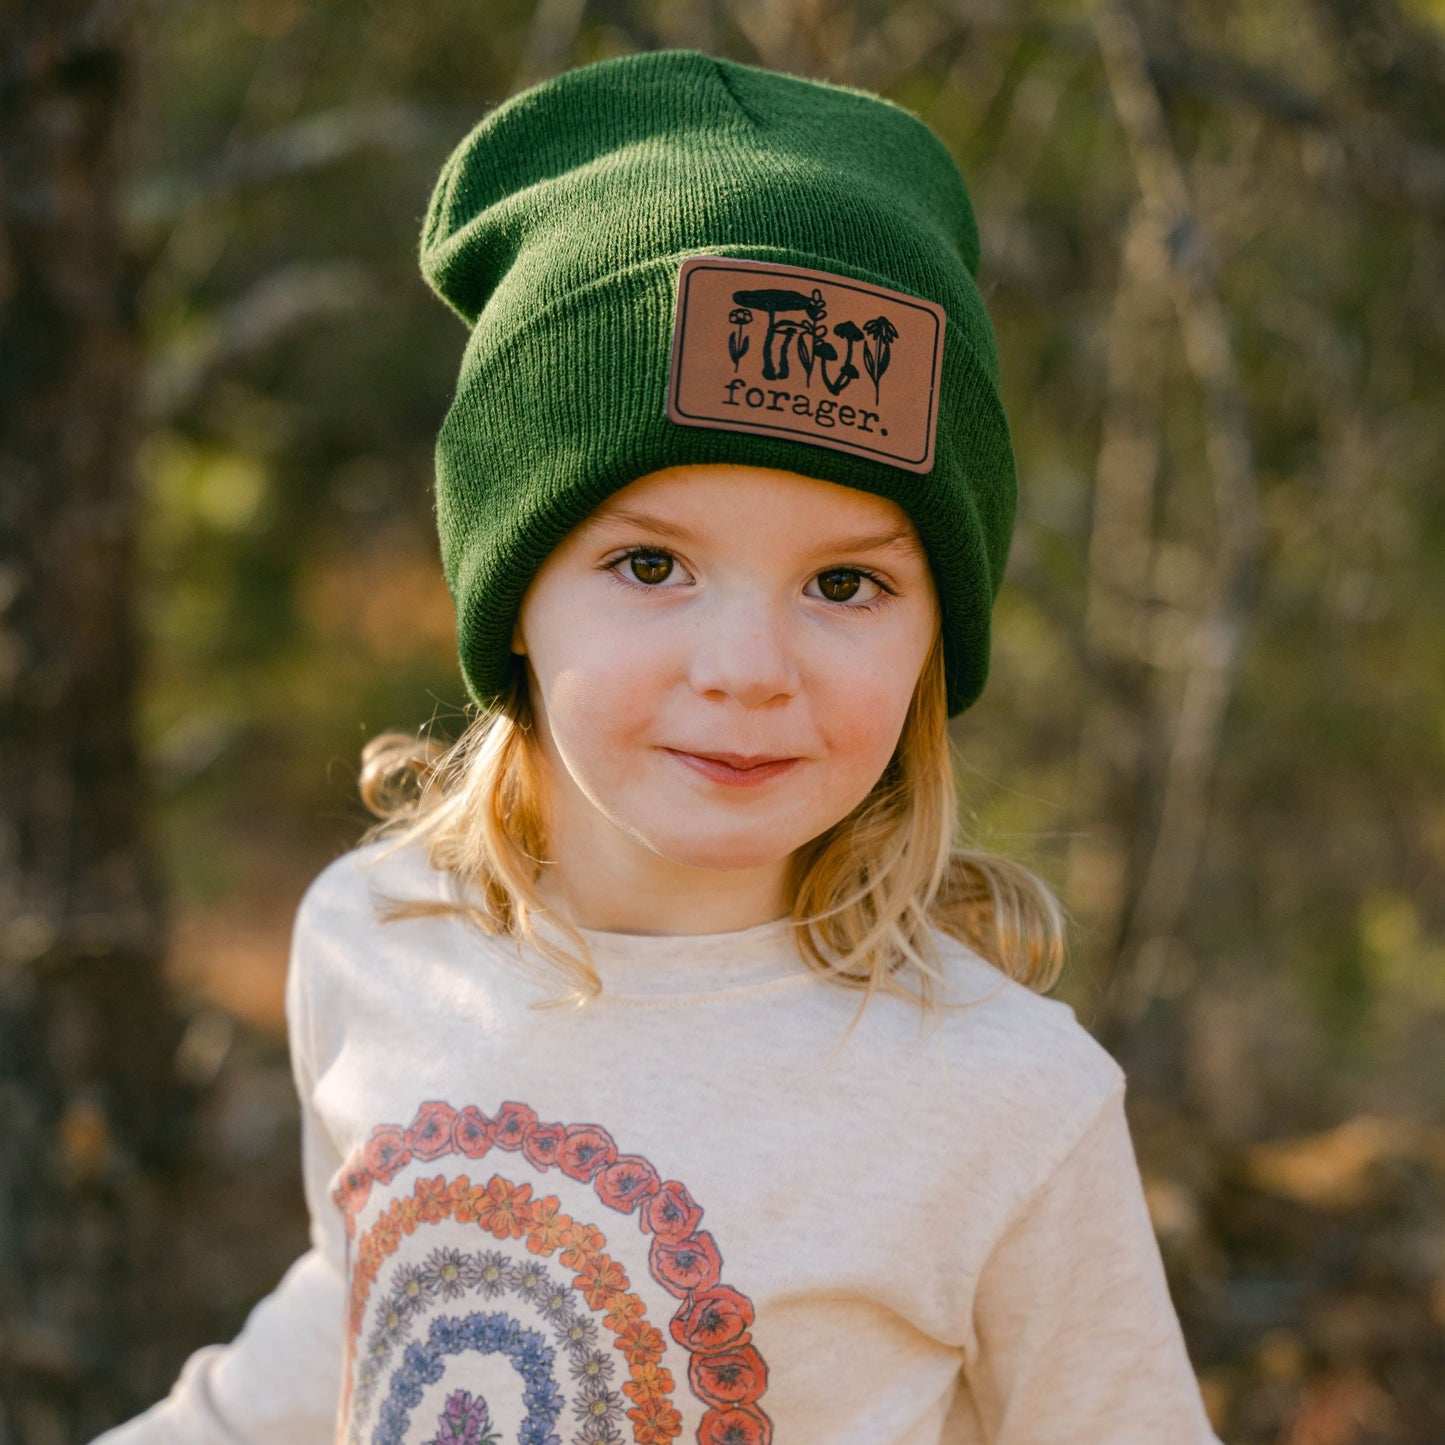 "Forager" Nature Lover Hiking Beanie | One Size Fits All | FOUR Color Options